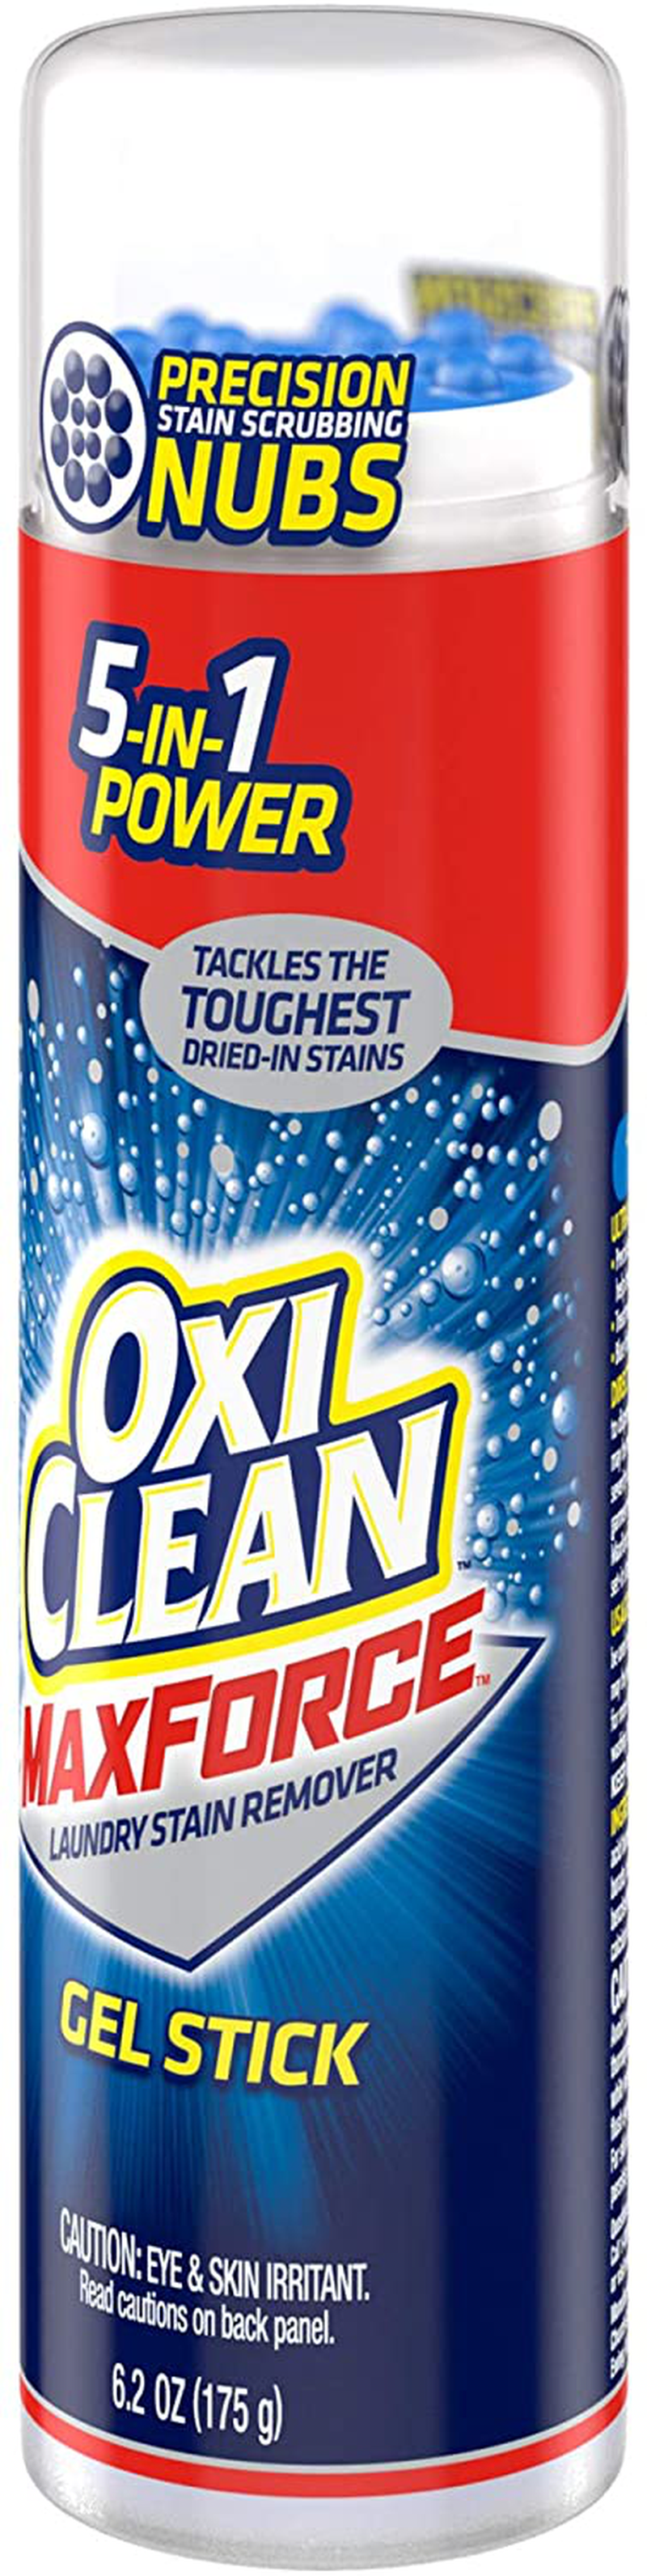 OxiClean Max Force Gel Stain Remover Stick, 6.2 Oz, Pack of 2